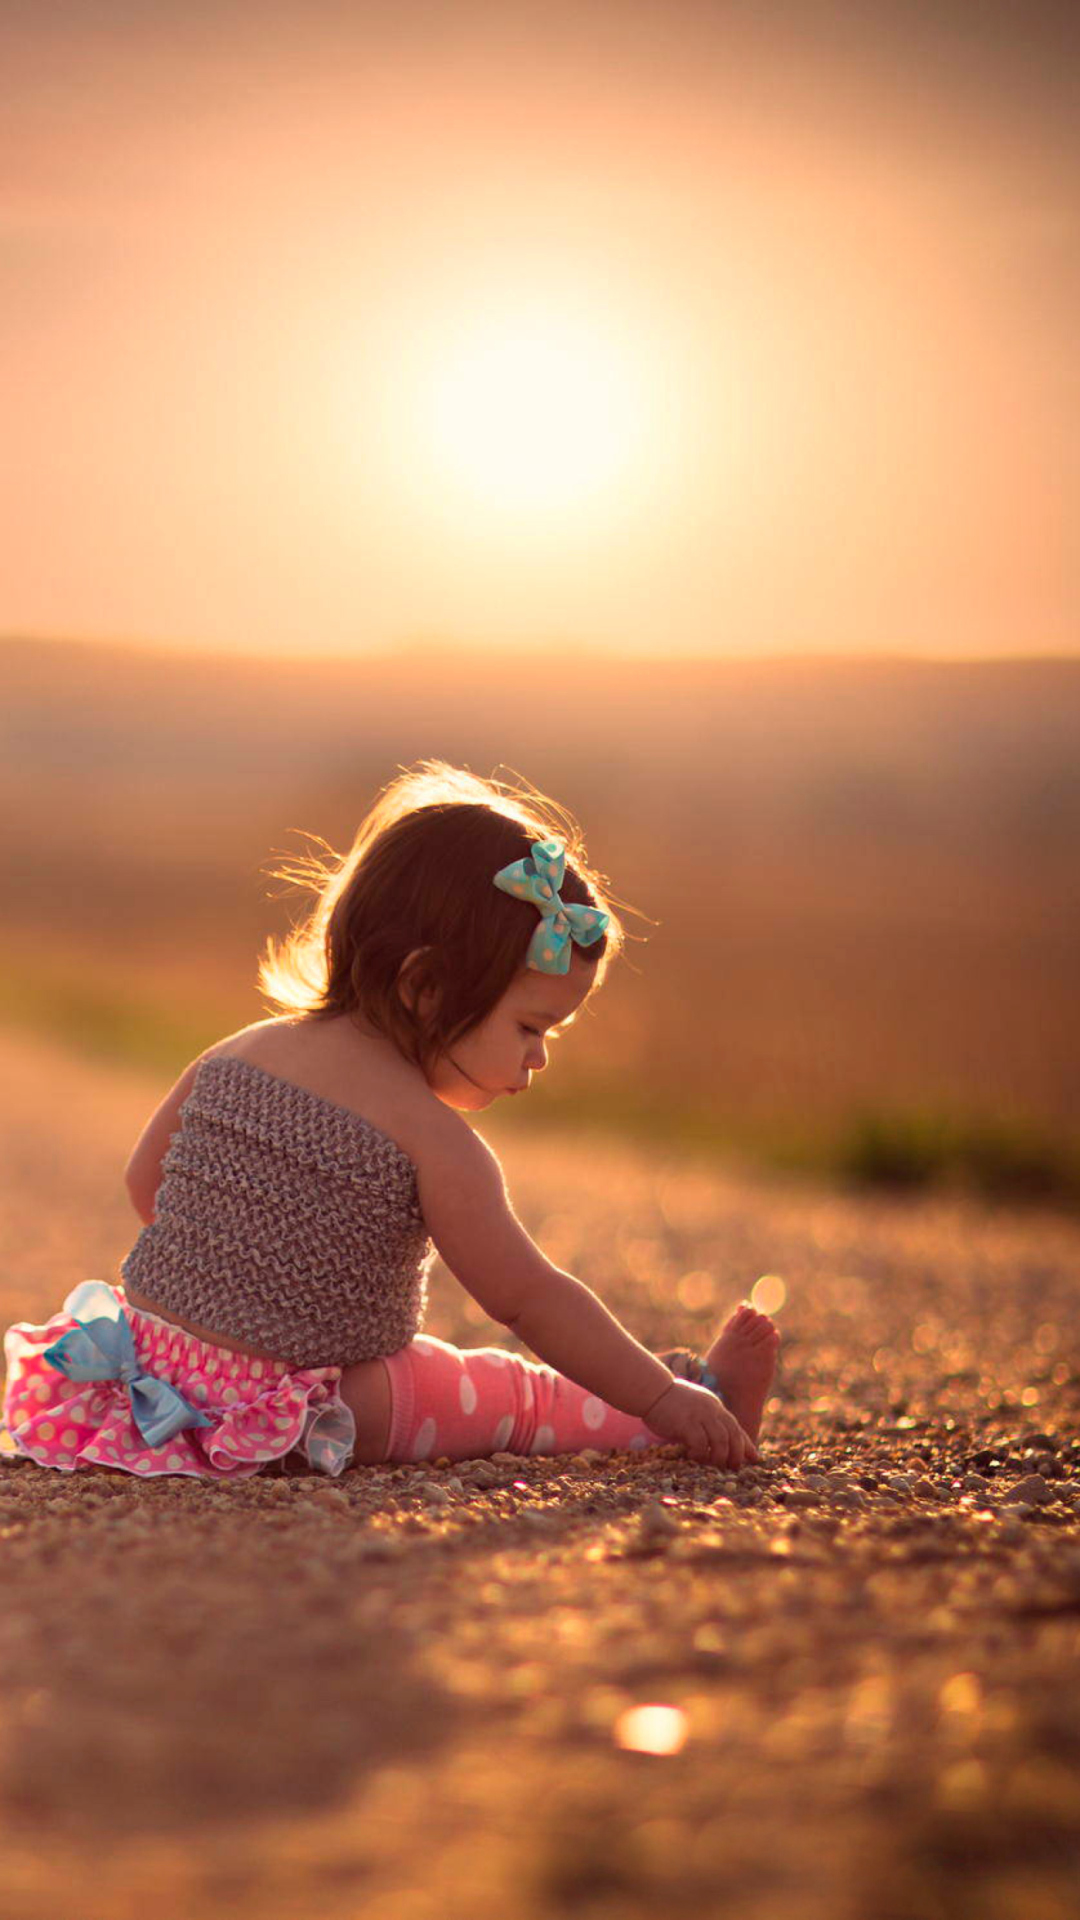 Das Child On Road At Sunset Wallpaper 1080x1920